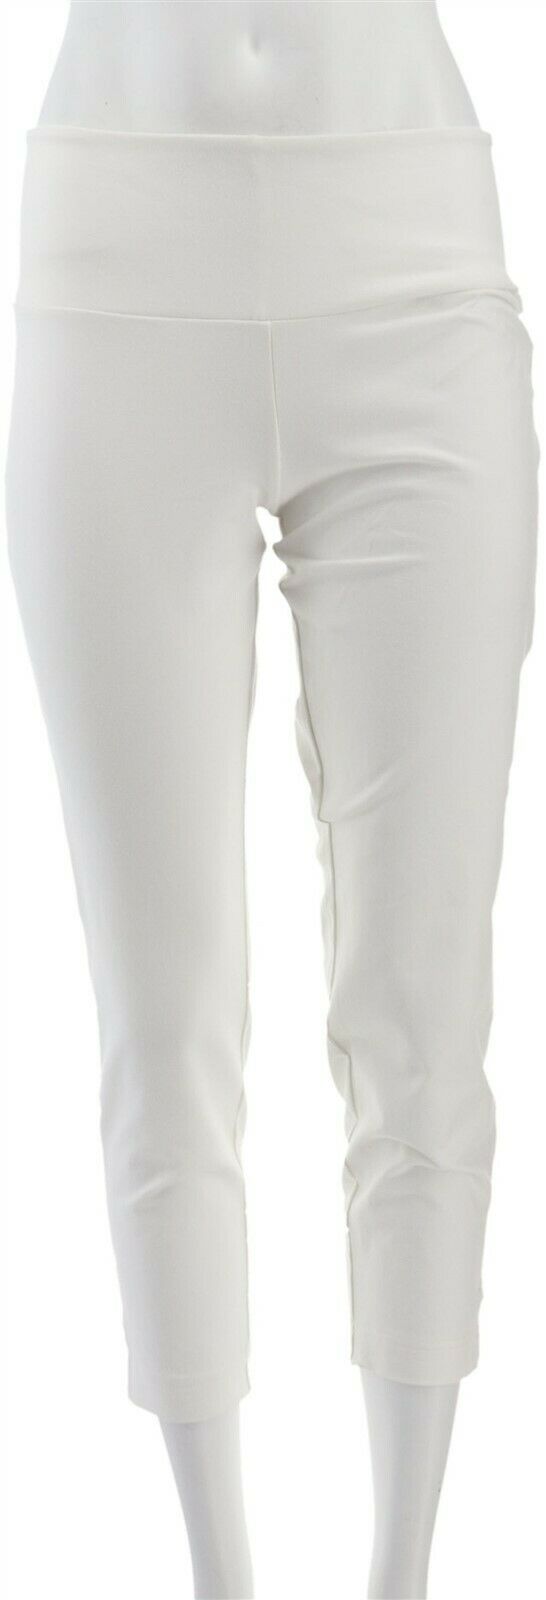 Women with Control Tall Tummy Control Set 2 Pants Chalk White L NEW A344736